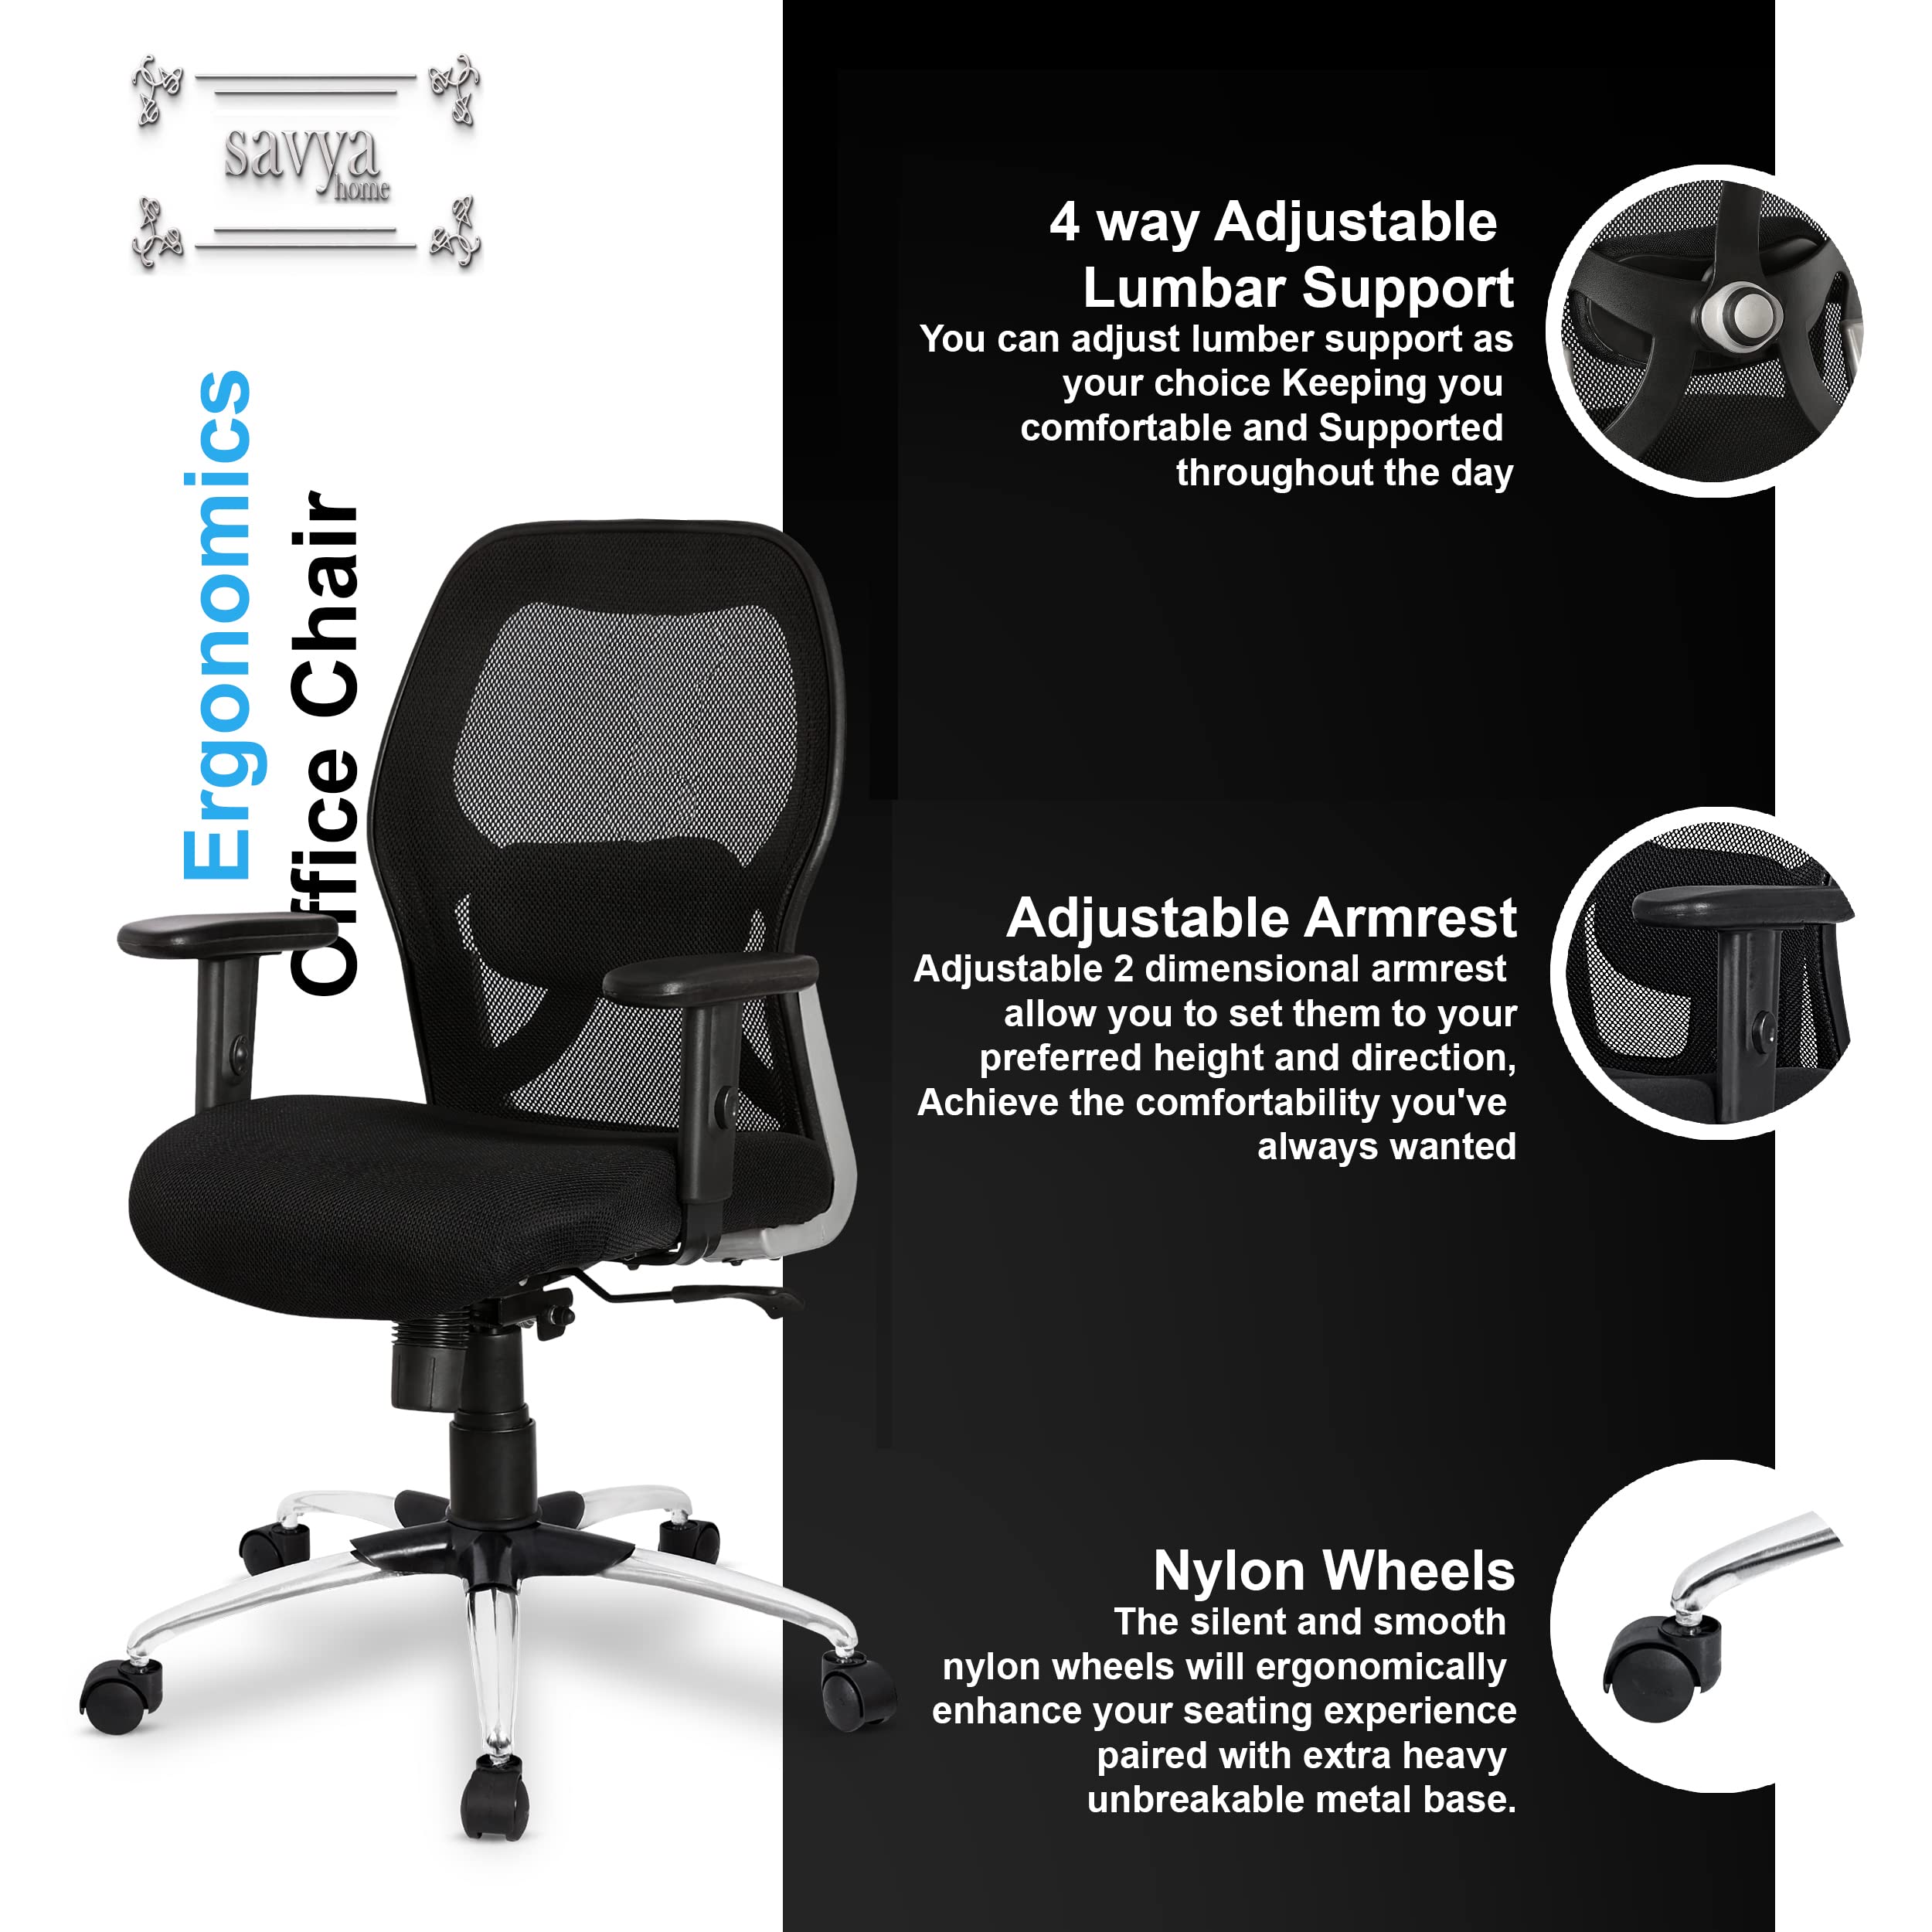 SAVYA HOME Apollo Mid Back Ergonomic Office Chair with Adjustable Arms and Anyposition Tilt Lock Mechanism (2D Lumbar Support & Contoured Meshback, 1 Piece) (Black)